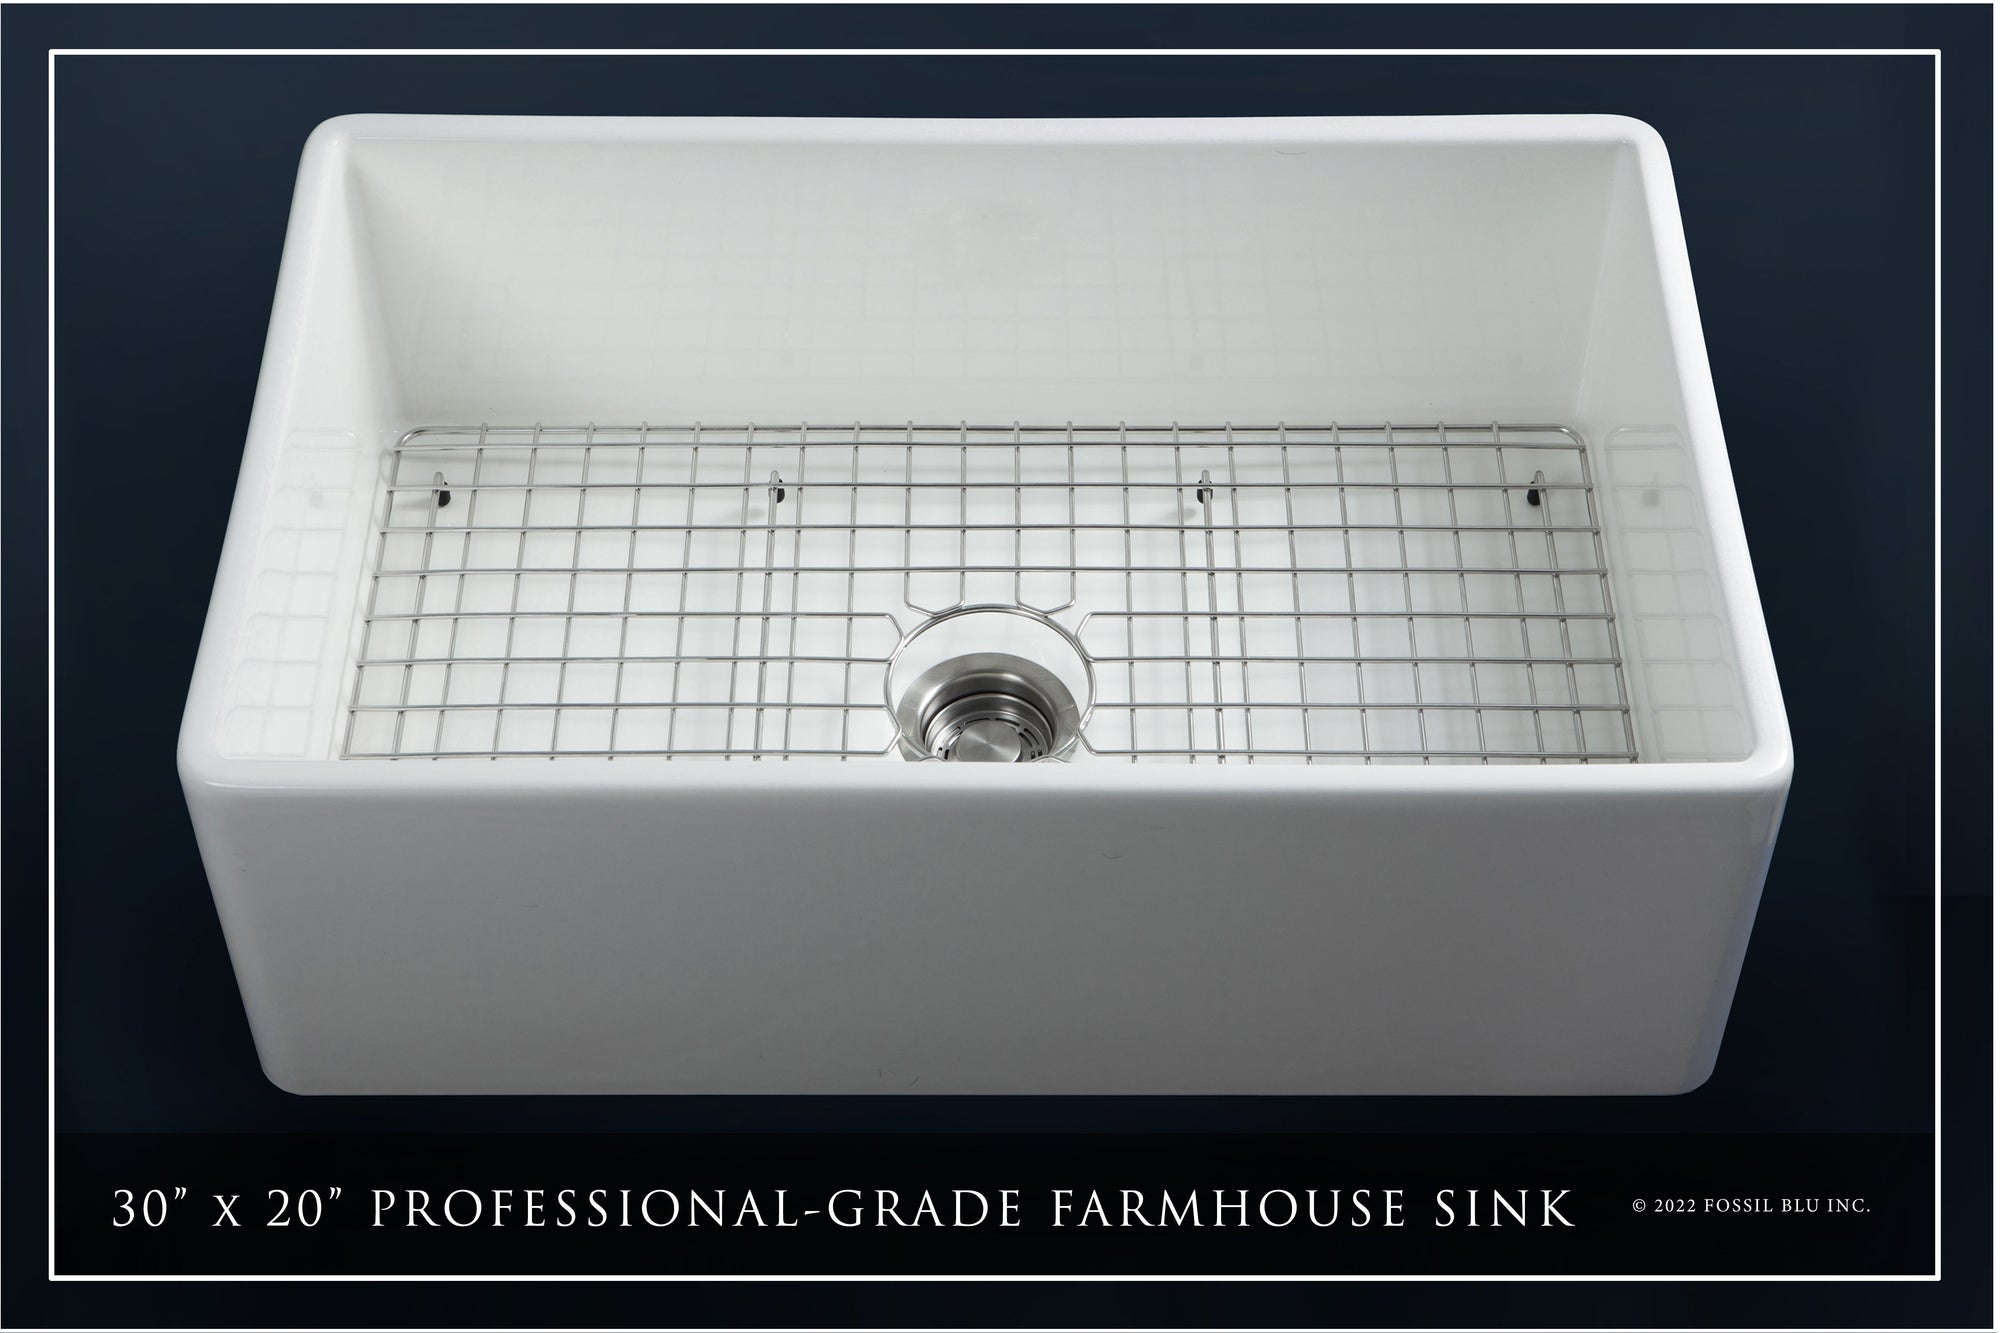 FSW1001 LUXURY 30-INCH SOLID FIRECLAY FARMHOUSE SINK IN WHITE, STAINLESS STEEL ACCS, FLAT FRONT